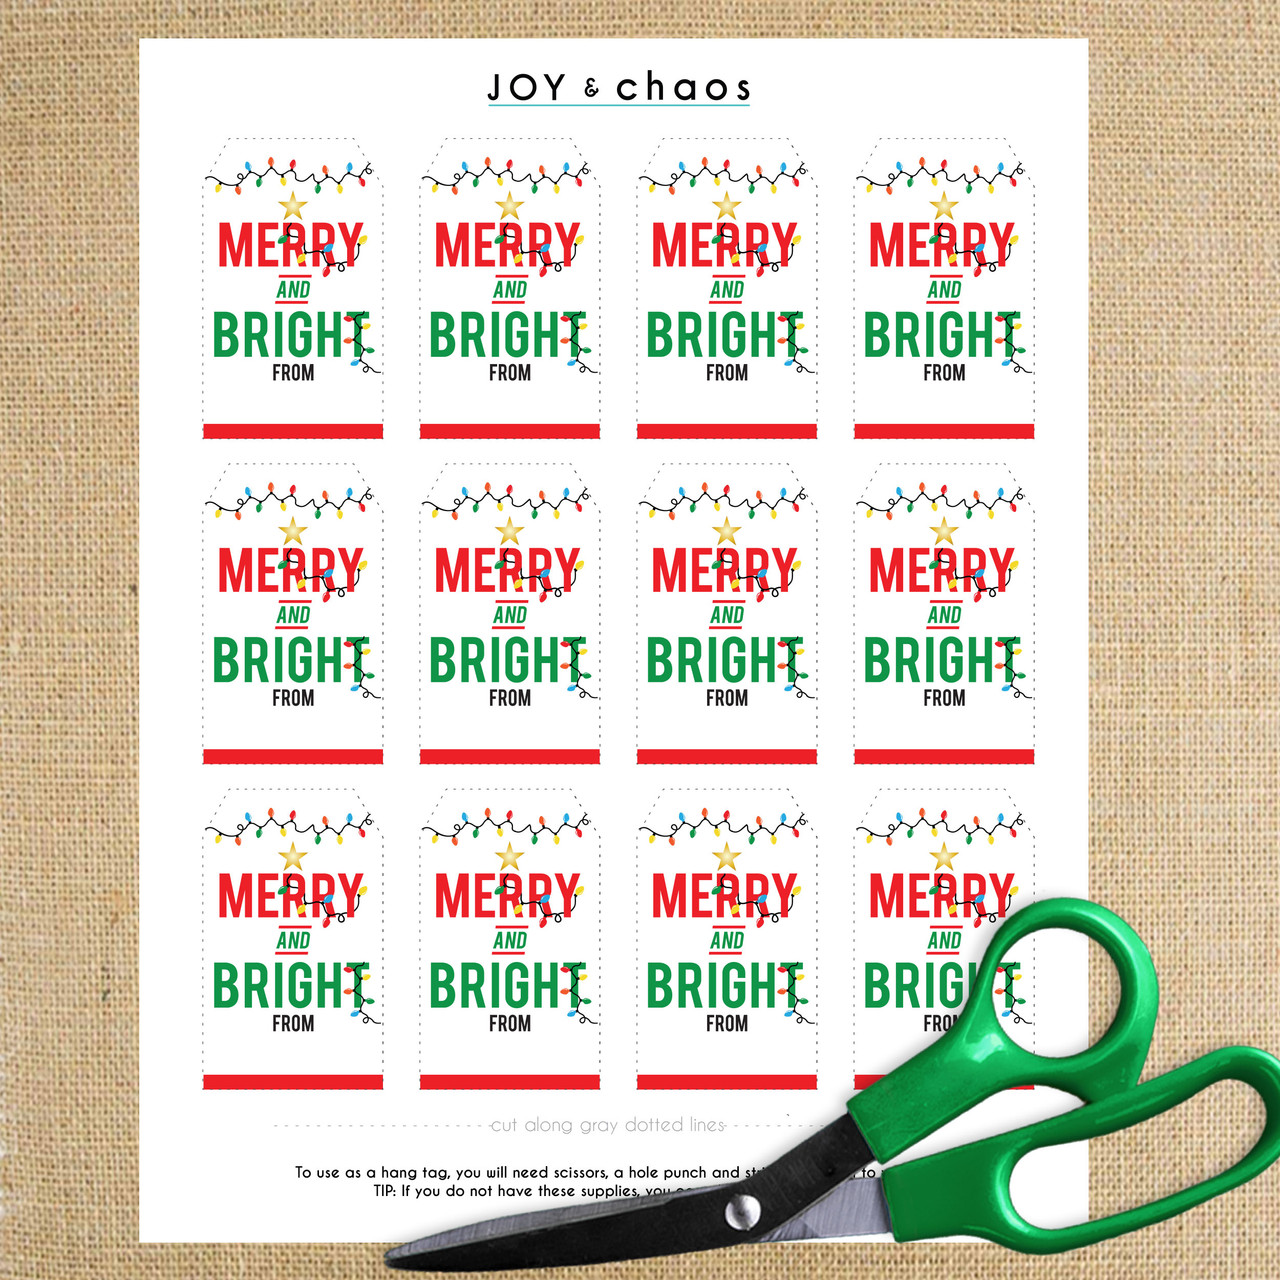 Merry and Bright Gift Idea with Printable Tag